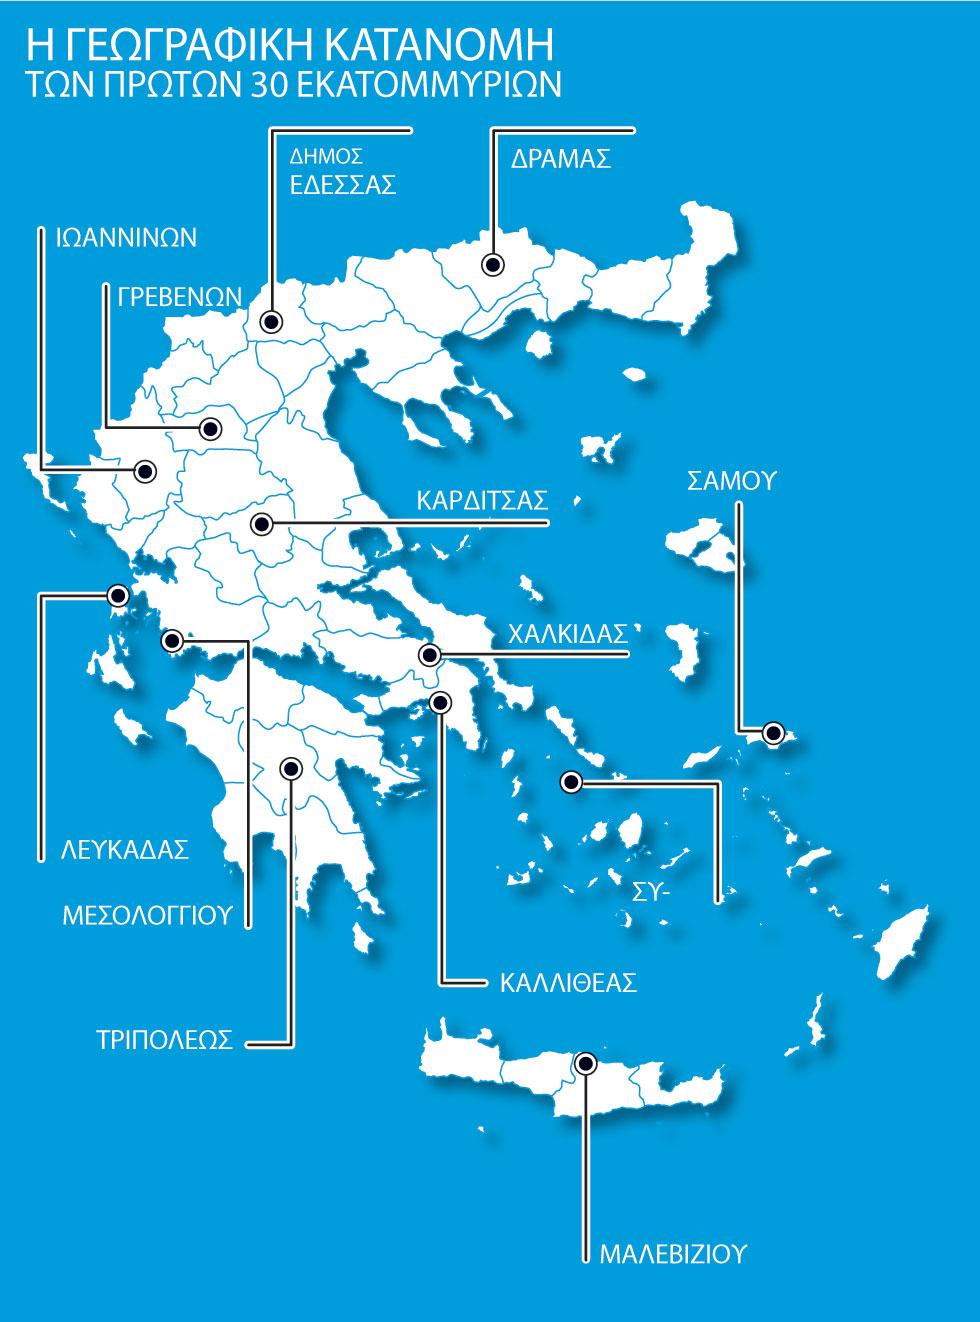 Greek Pilot Minimum Quarandeed Income Scheme_2 13 municipalities will implement the pilot scheme. We have no information on the initial number of beneficiaries (for the pilot).